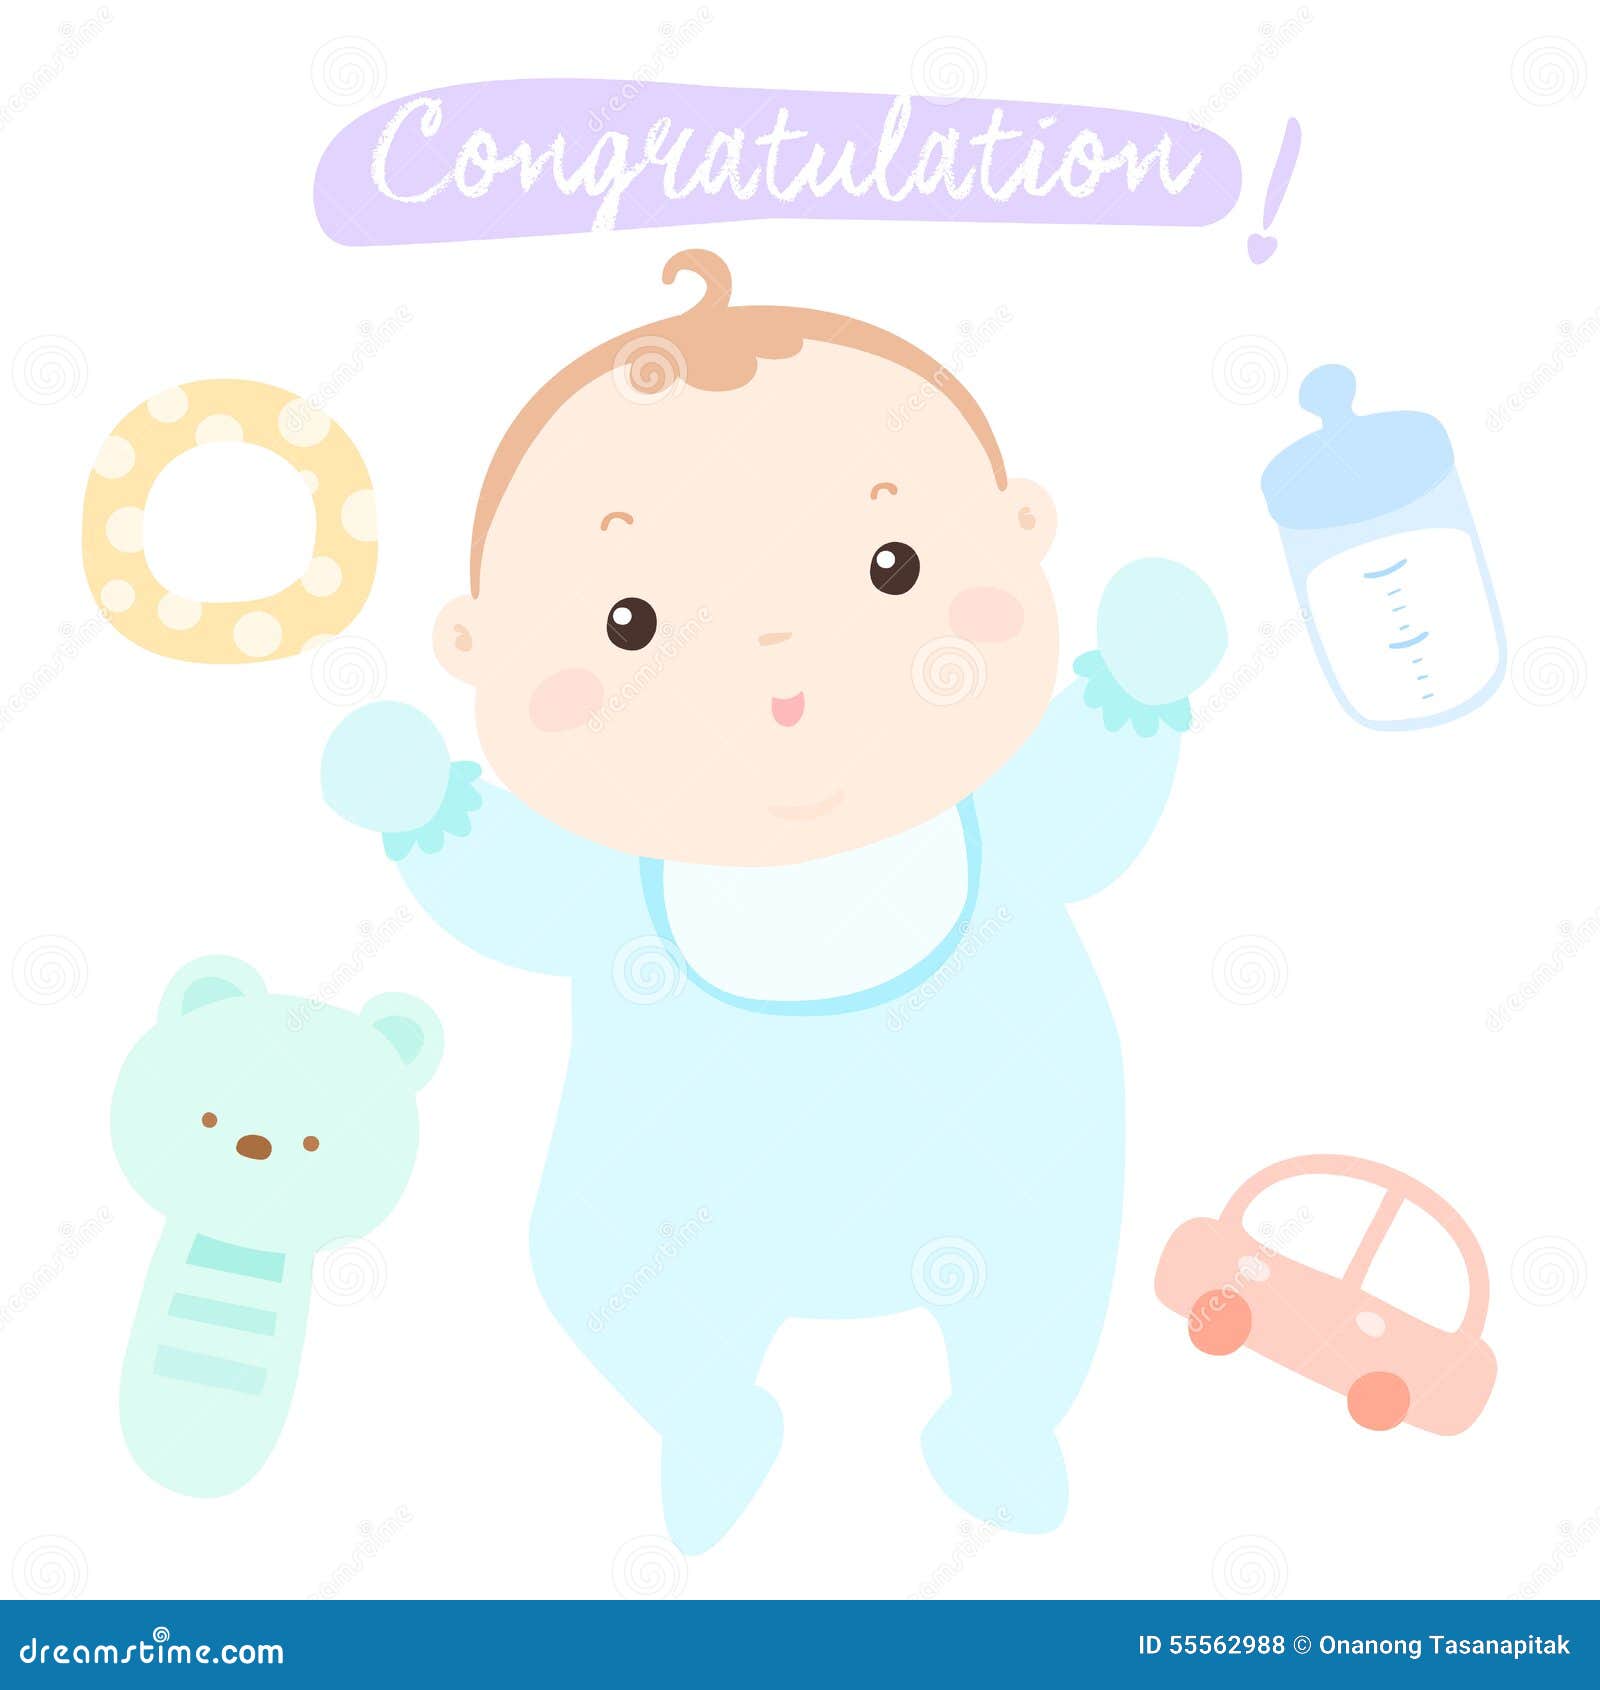 congratulations new baby clipart free - photo #27